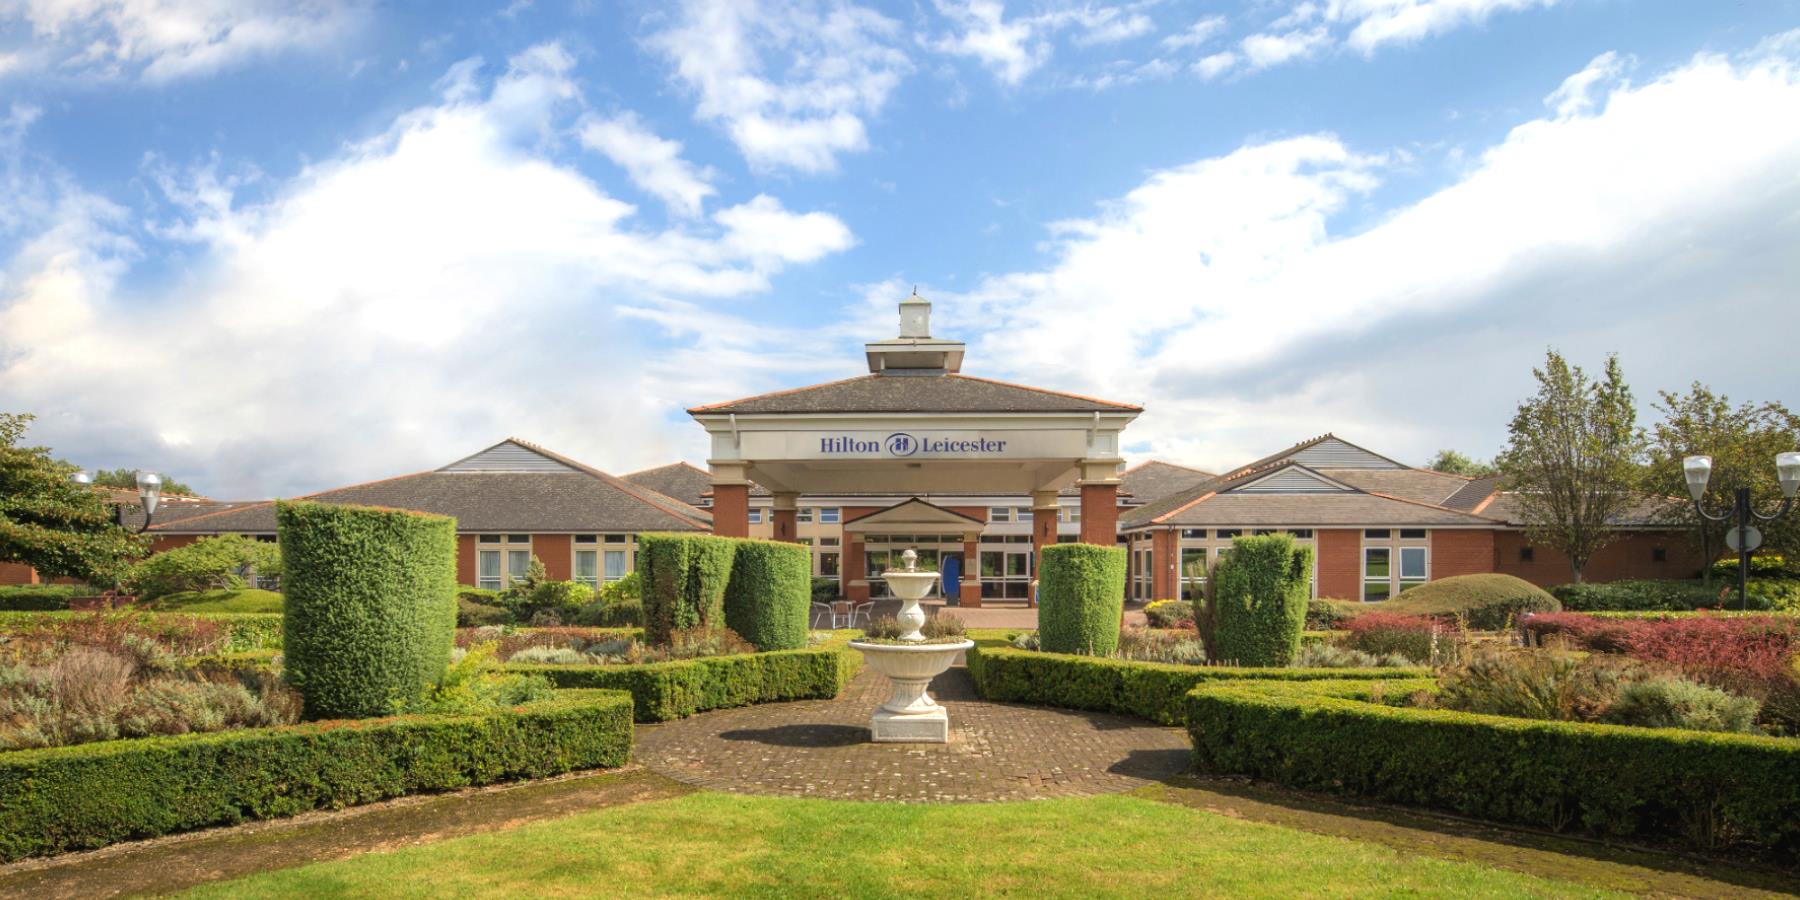 Hilton Leicester - Accommodation in Leicester